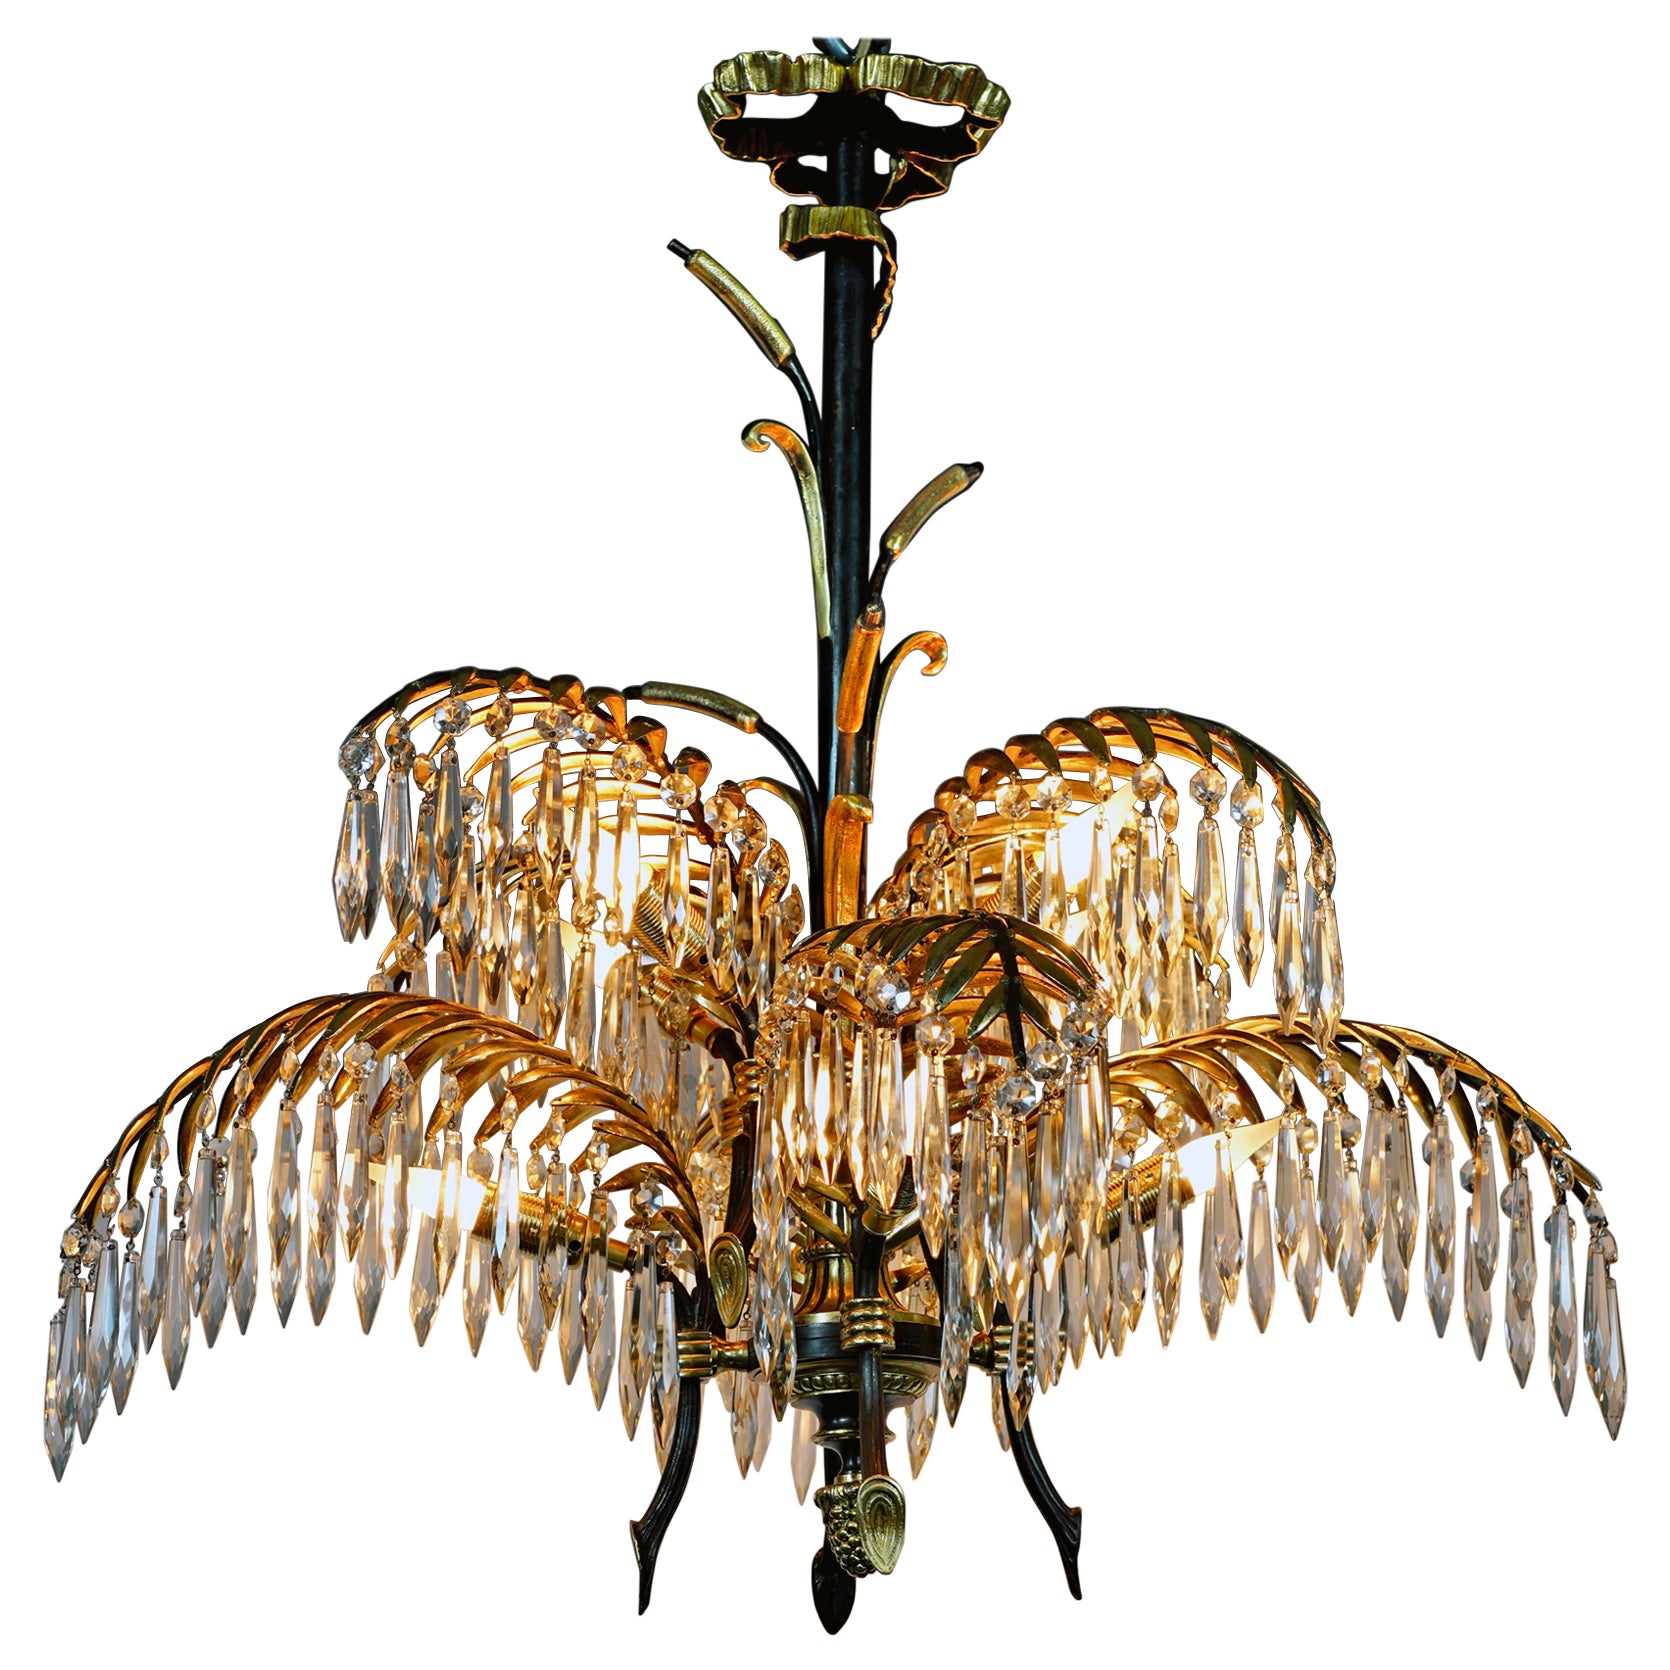 Crystal and Bronze "Palm"Chandelier attr. to Maison Baguès, France, circa 1890